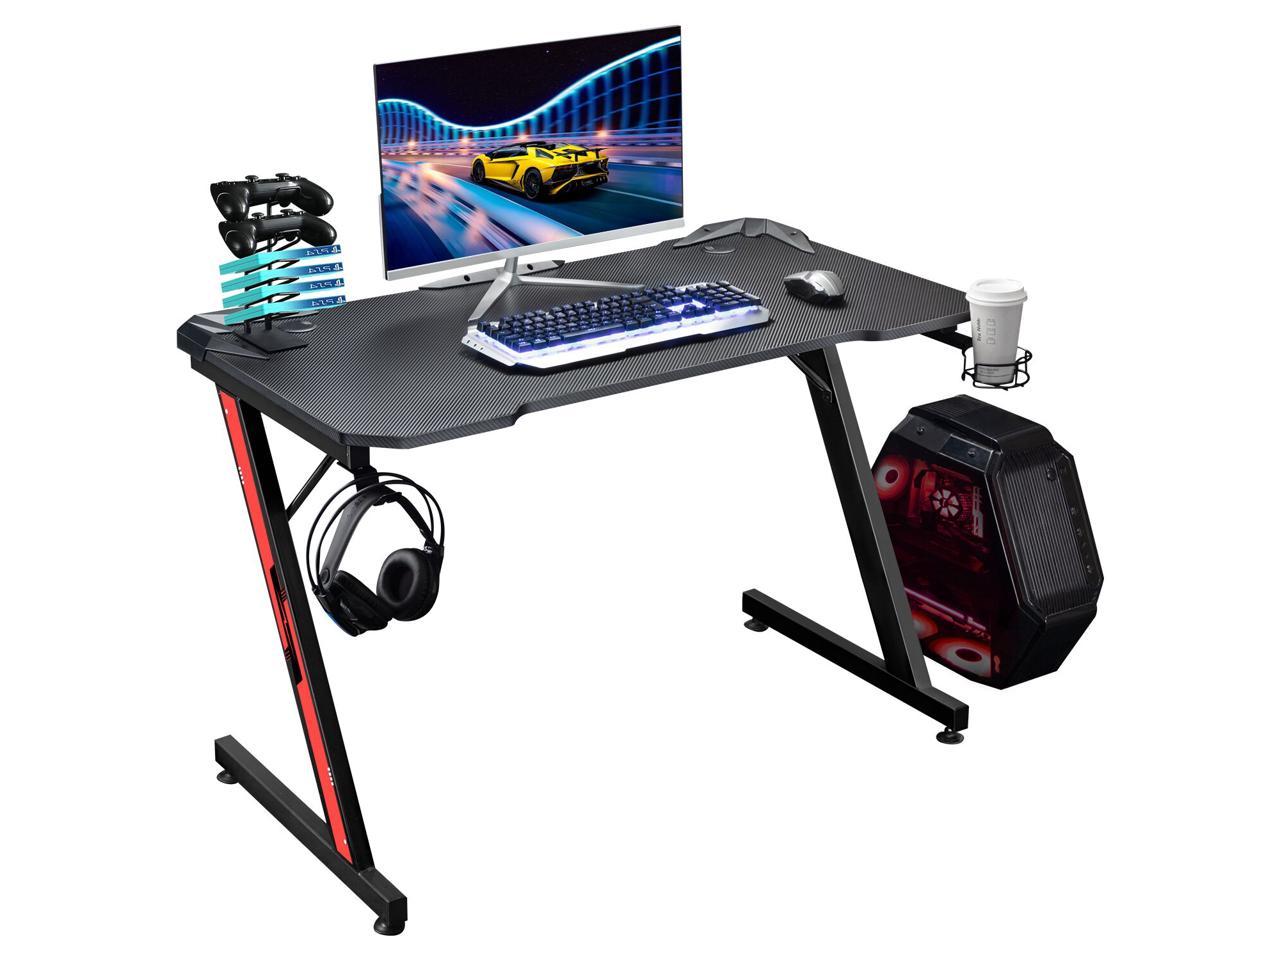 Homall 43" Gaming Desk Z-shaped Racing Style Ergonomic Computer Workstation with Large Carbon Fiber Surface, Cup Holder, Headset Hook, Game Handle Rack